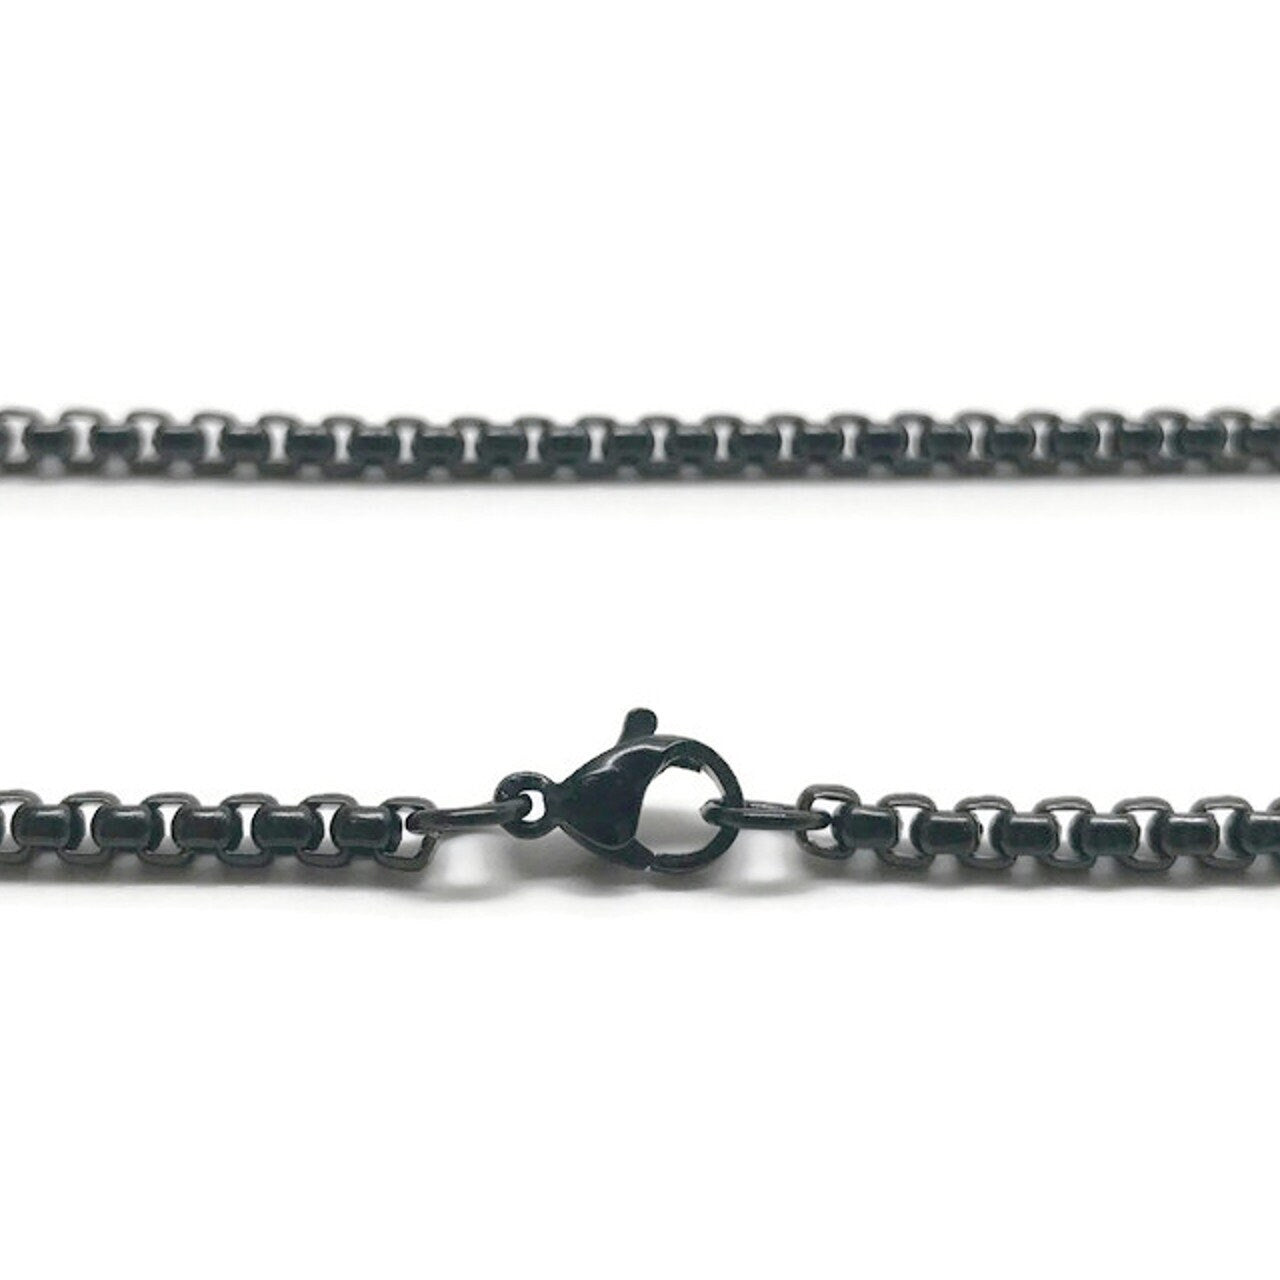 Box Link Necklace Chain (3mm) - Black, 20